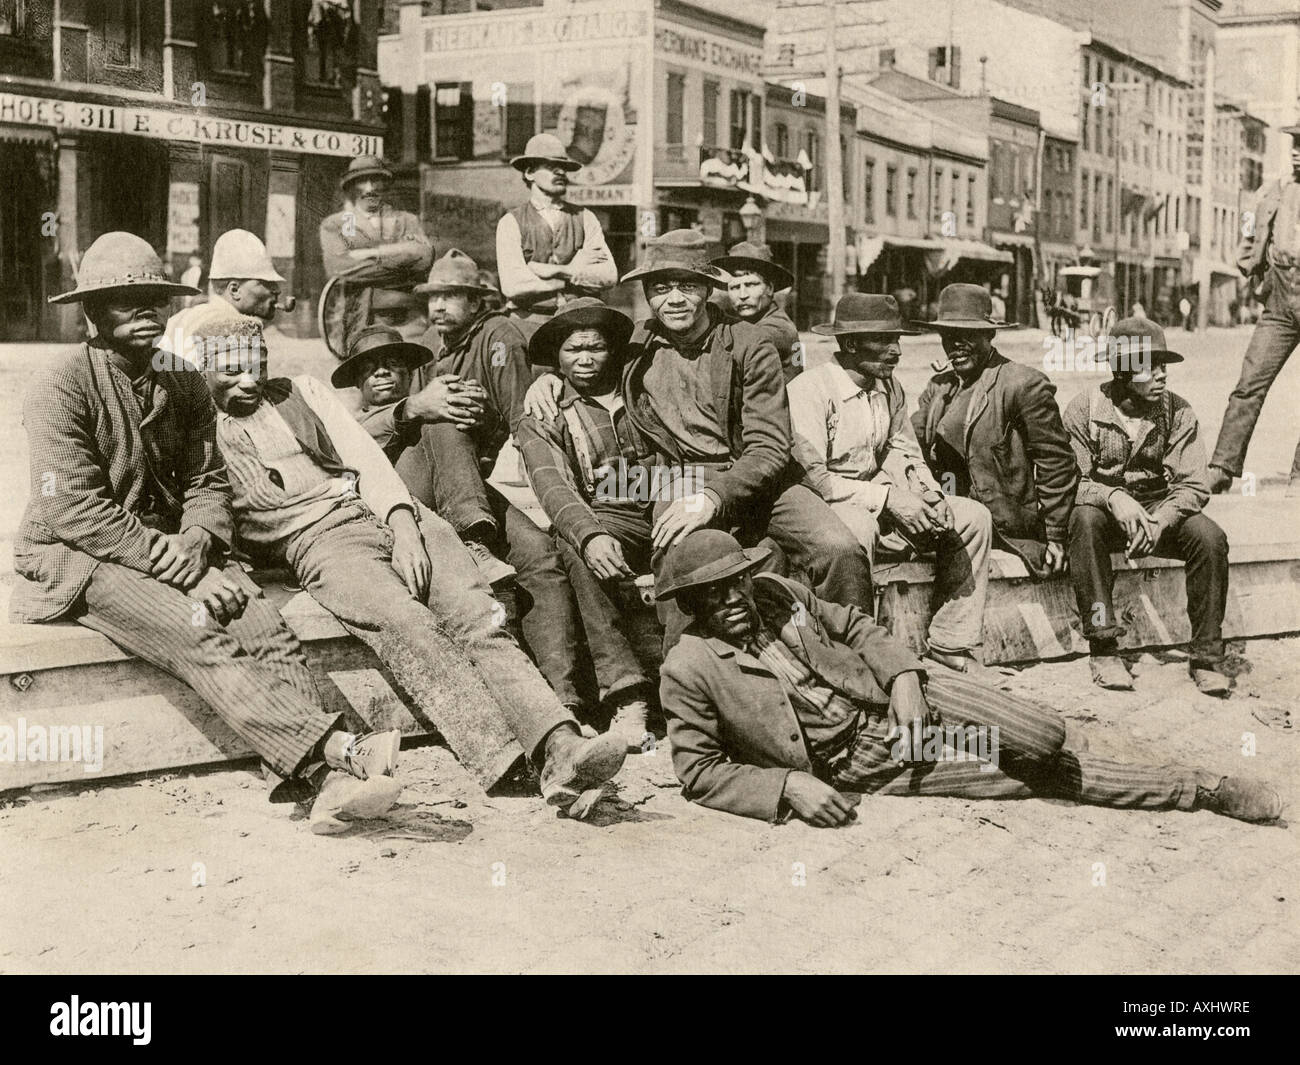 African American roustabouts on the levee in St Louis Missouri 1890s. Albertype (photograph) Stock Photo